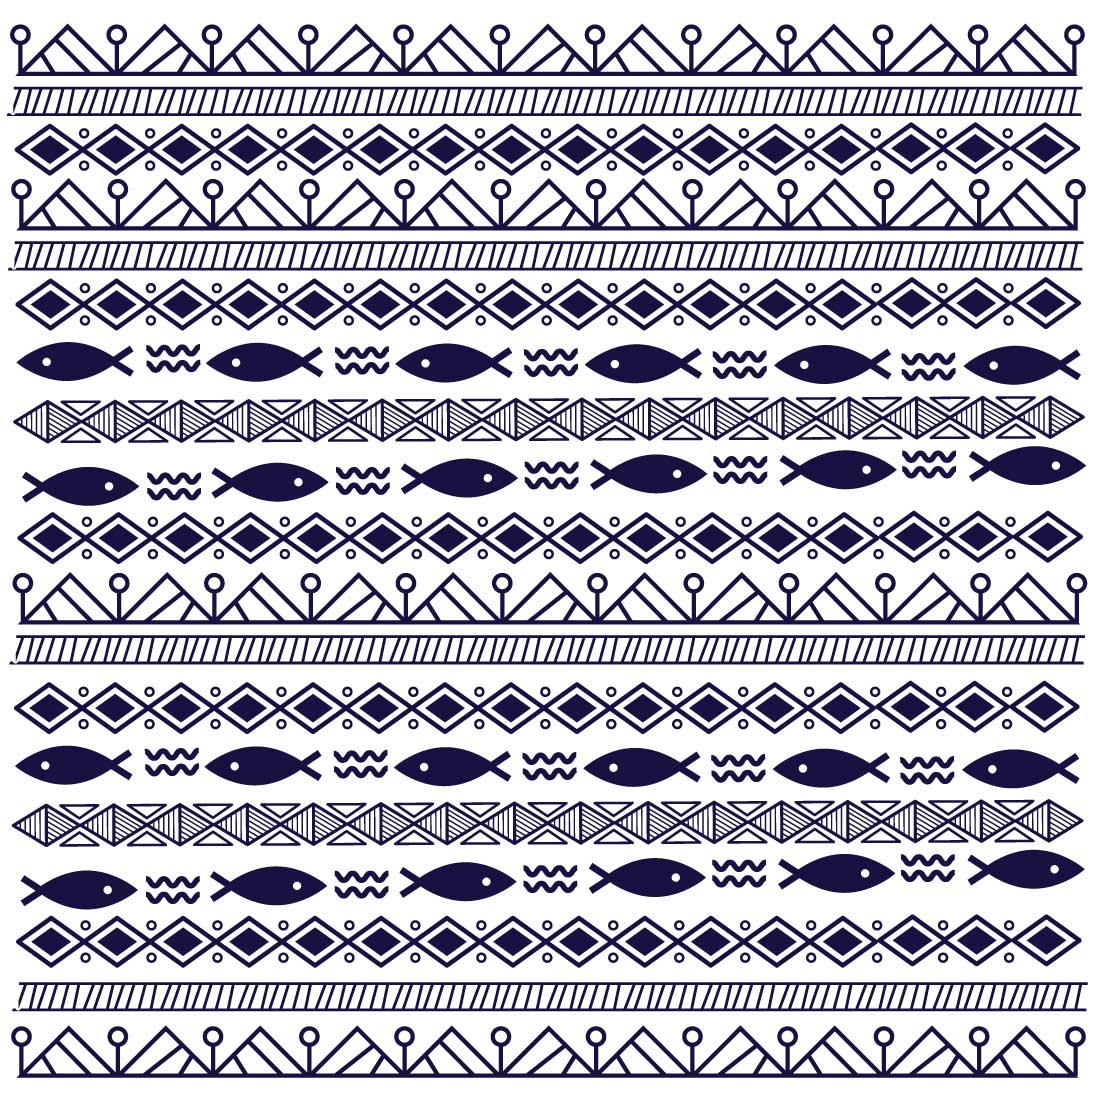 Cute Hand Drawn Background Pattern Design Vector cover image.